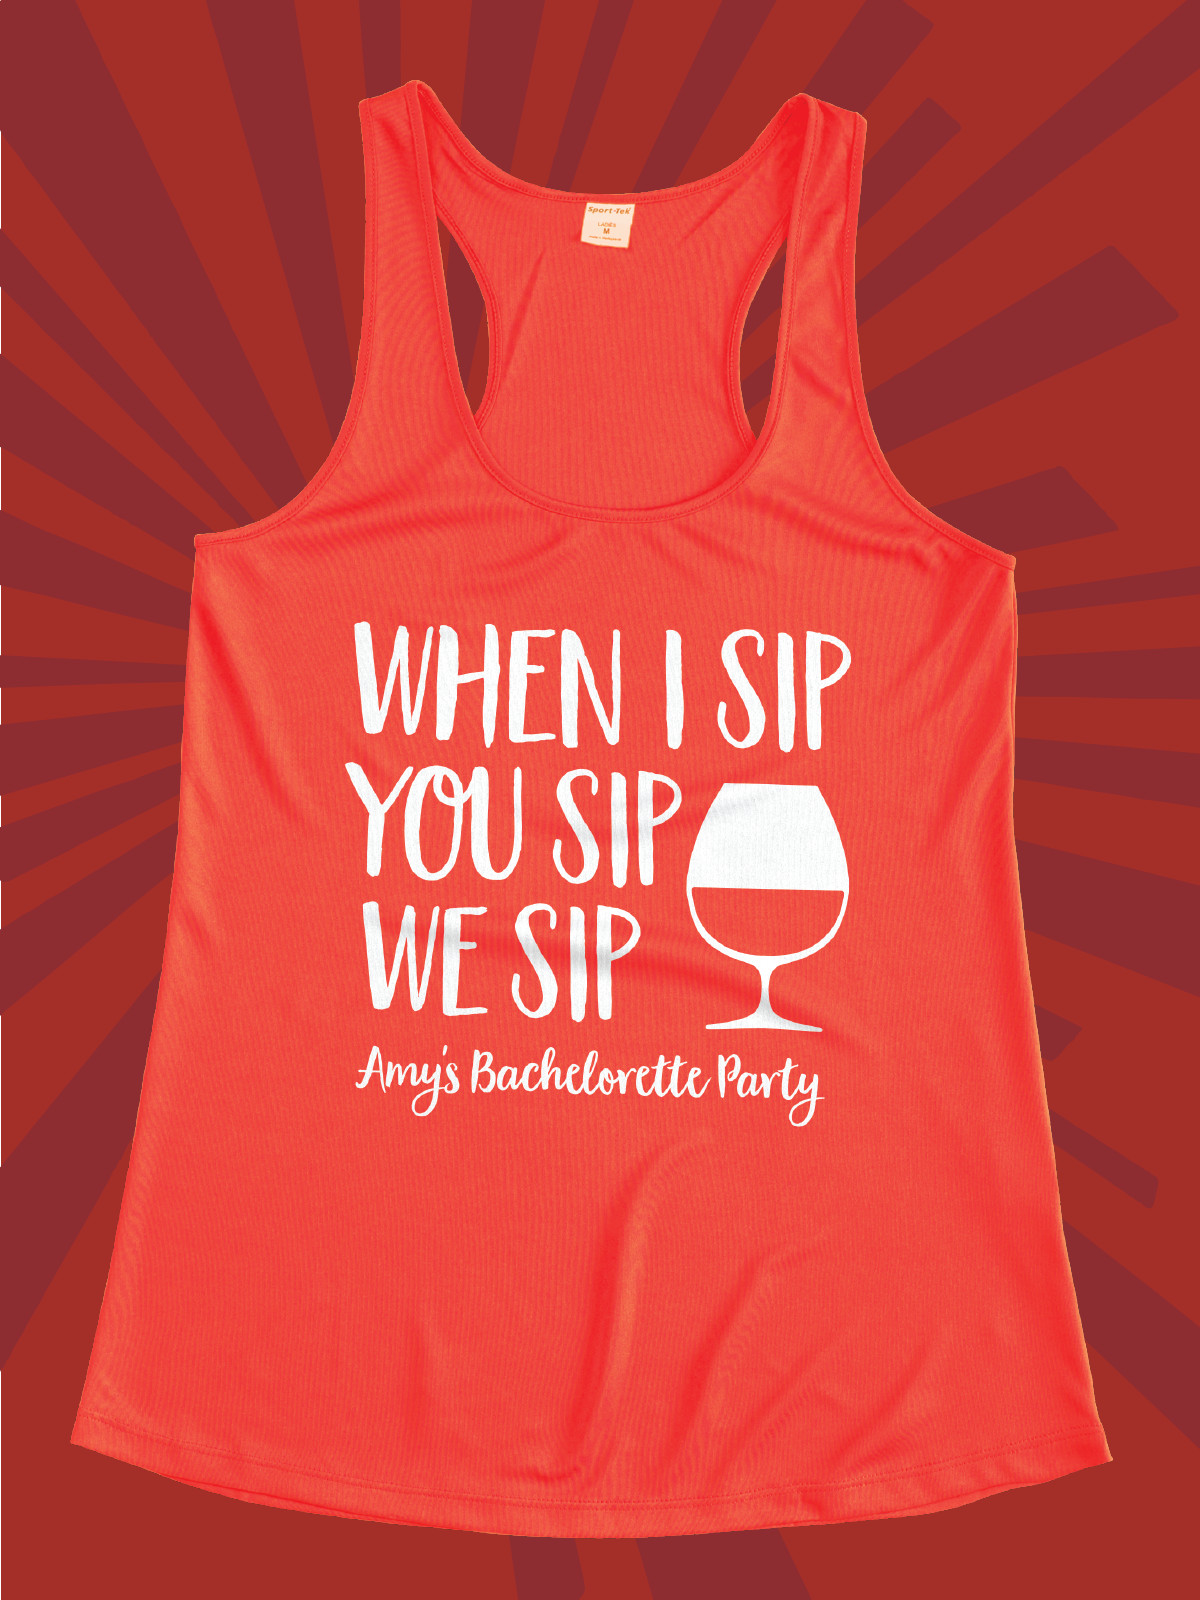 Cute Ideas For Bachelorette Party
 Funny and Trendy Bachelor & Bachelorette Party Shirts